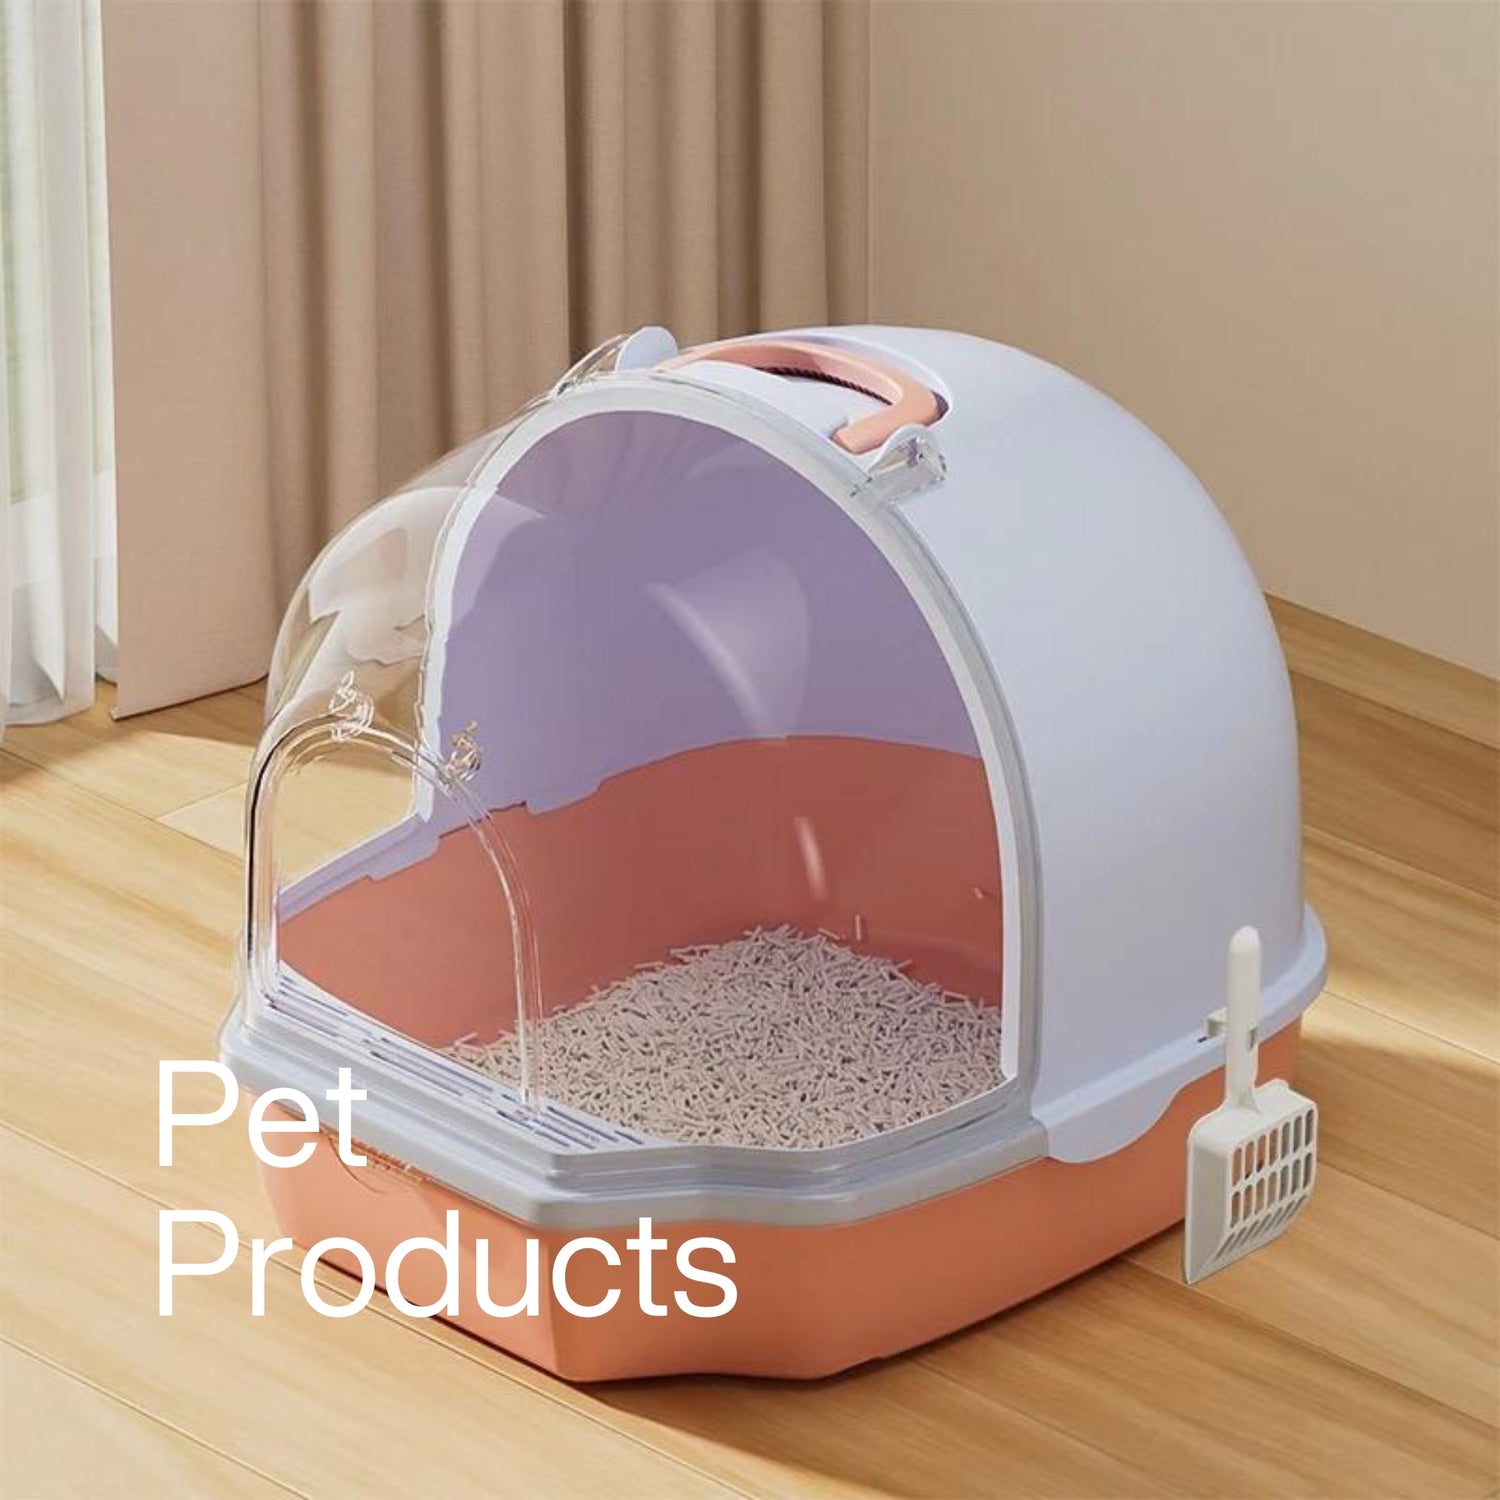 shop pet products, dog product, cat product, rabbit products